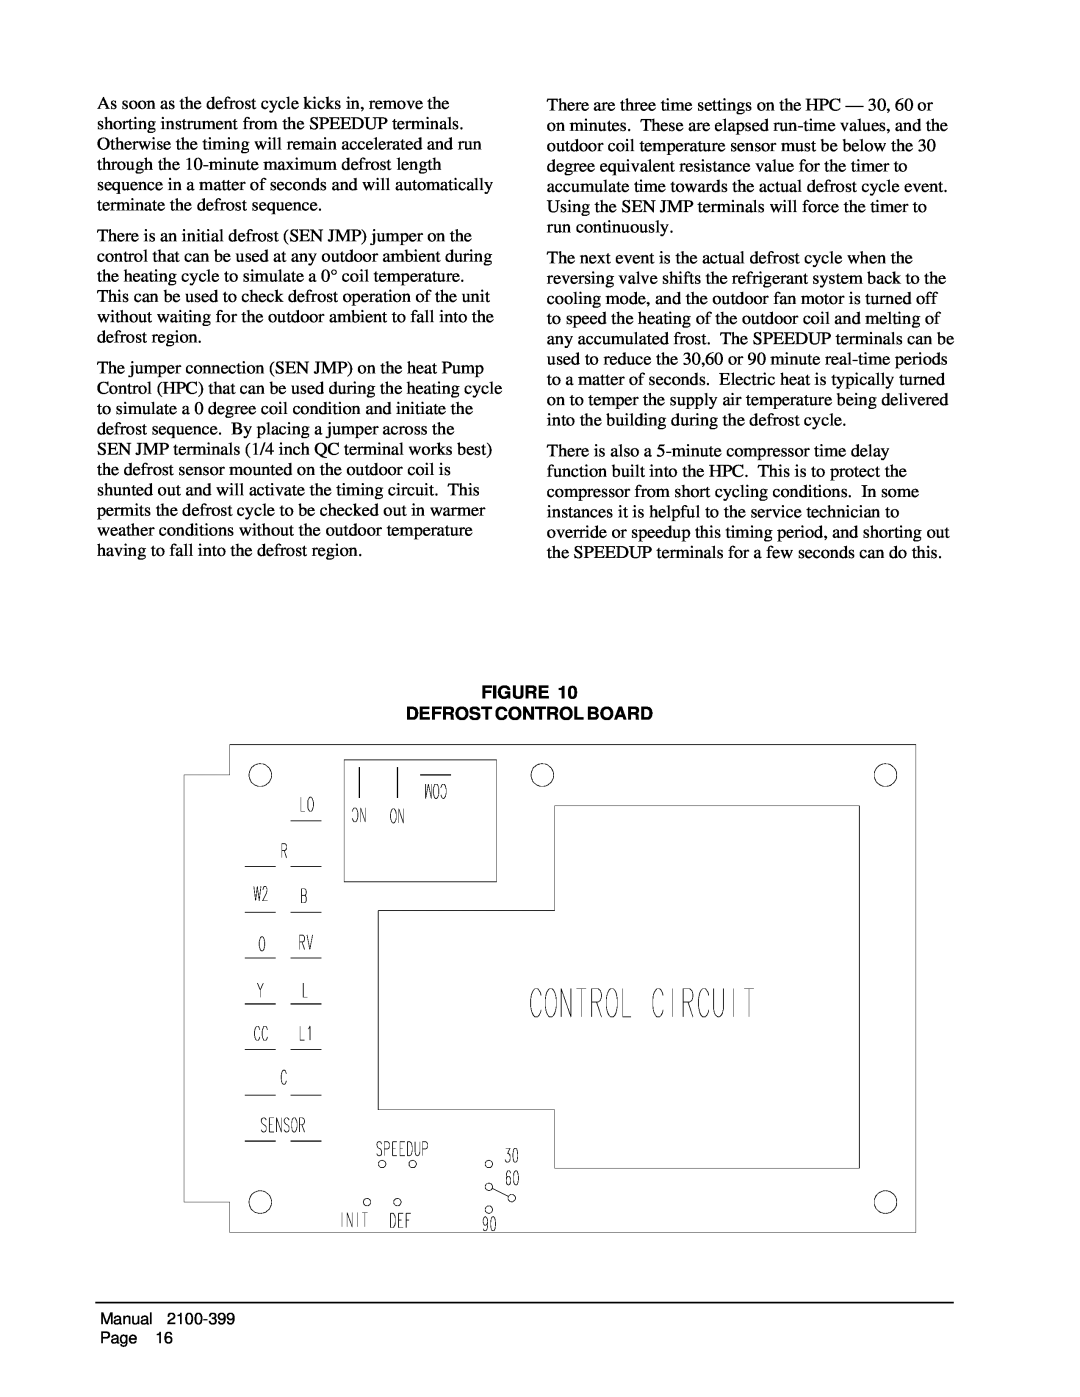 Bard WH602, WH483, WH421 installation instructions Figure Defrost Control Board 